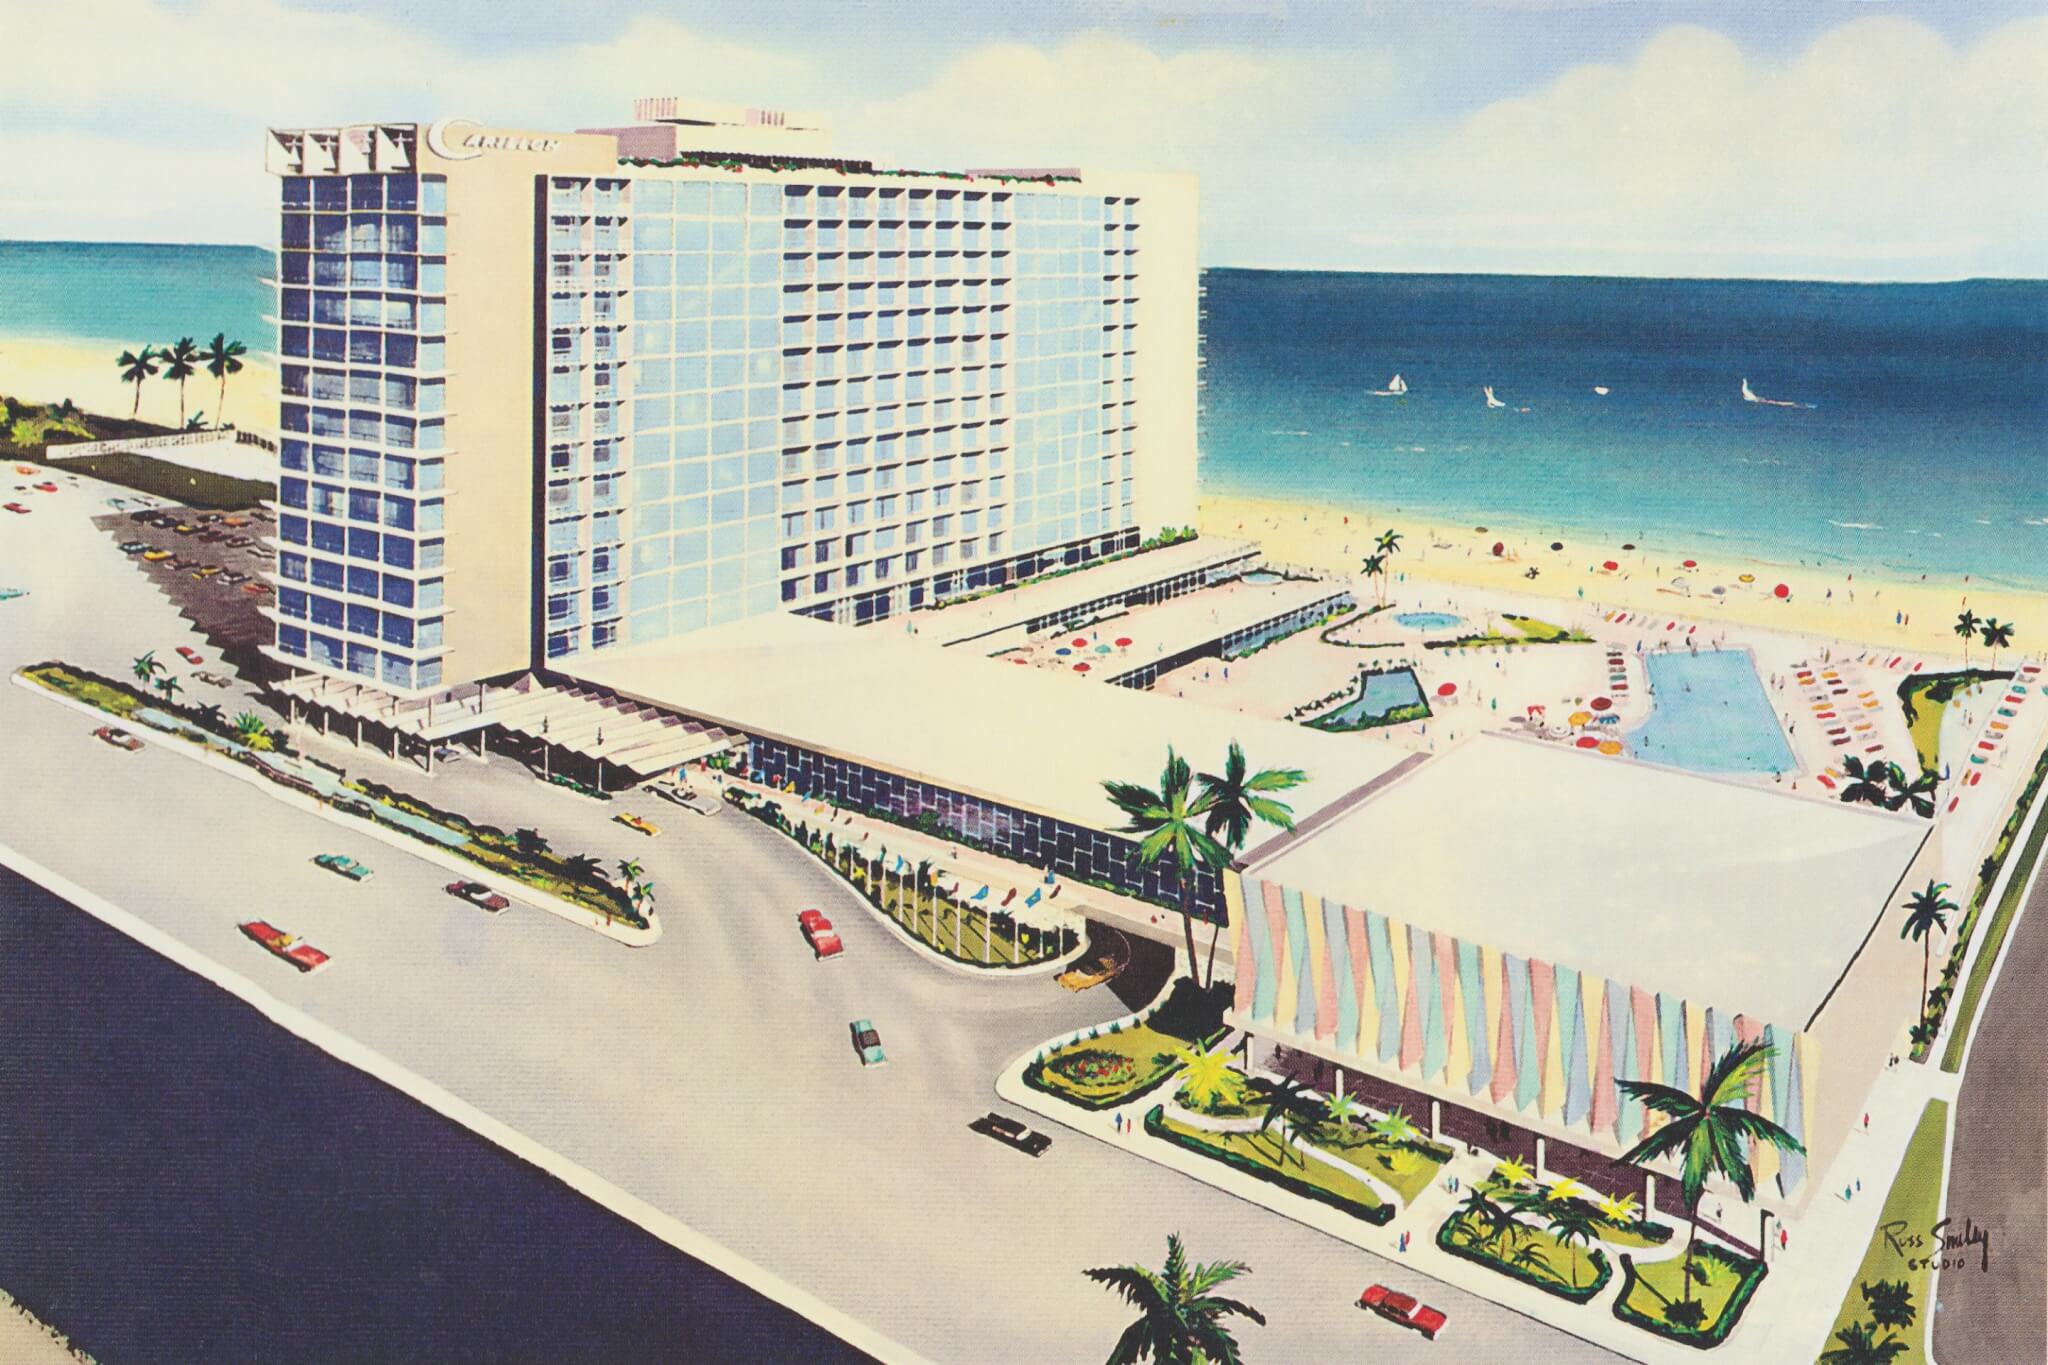 illustration of an oceanfront resort in miami beach in the 1950s